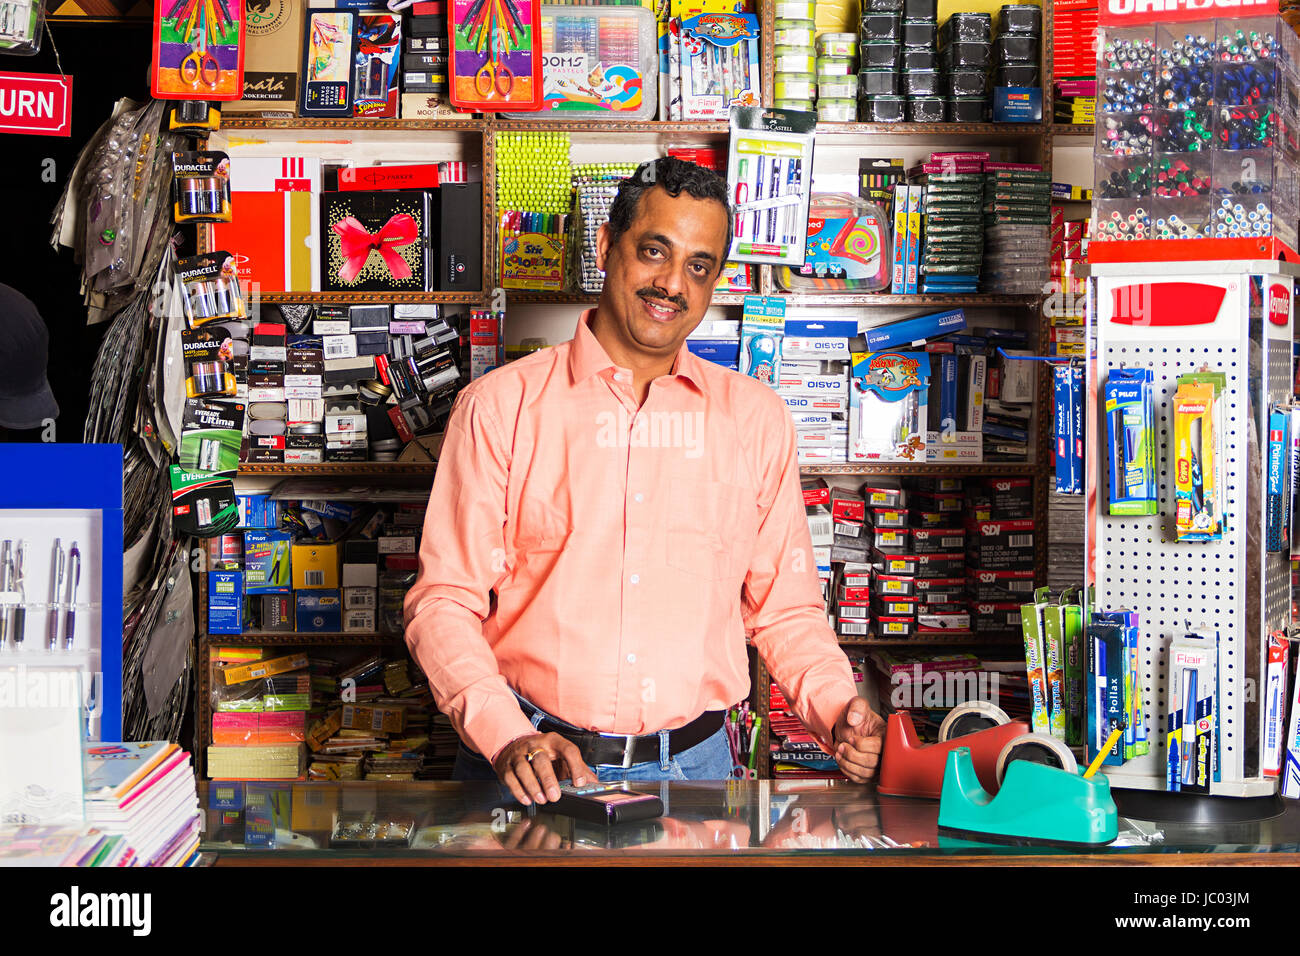 1 Shopkeeper Man Using Credit Card Reader In Stationery Shop Stock Photo